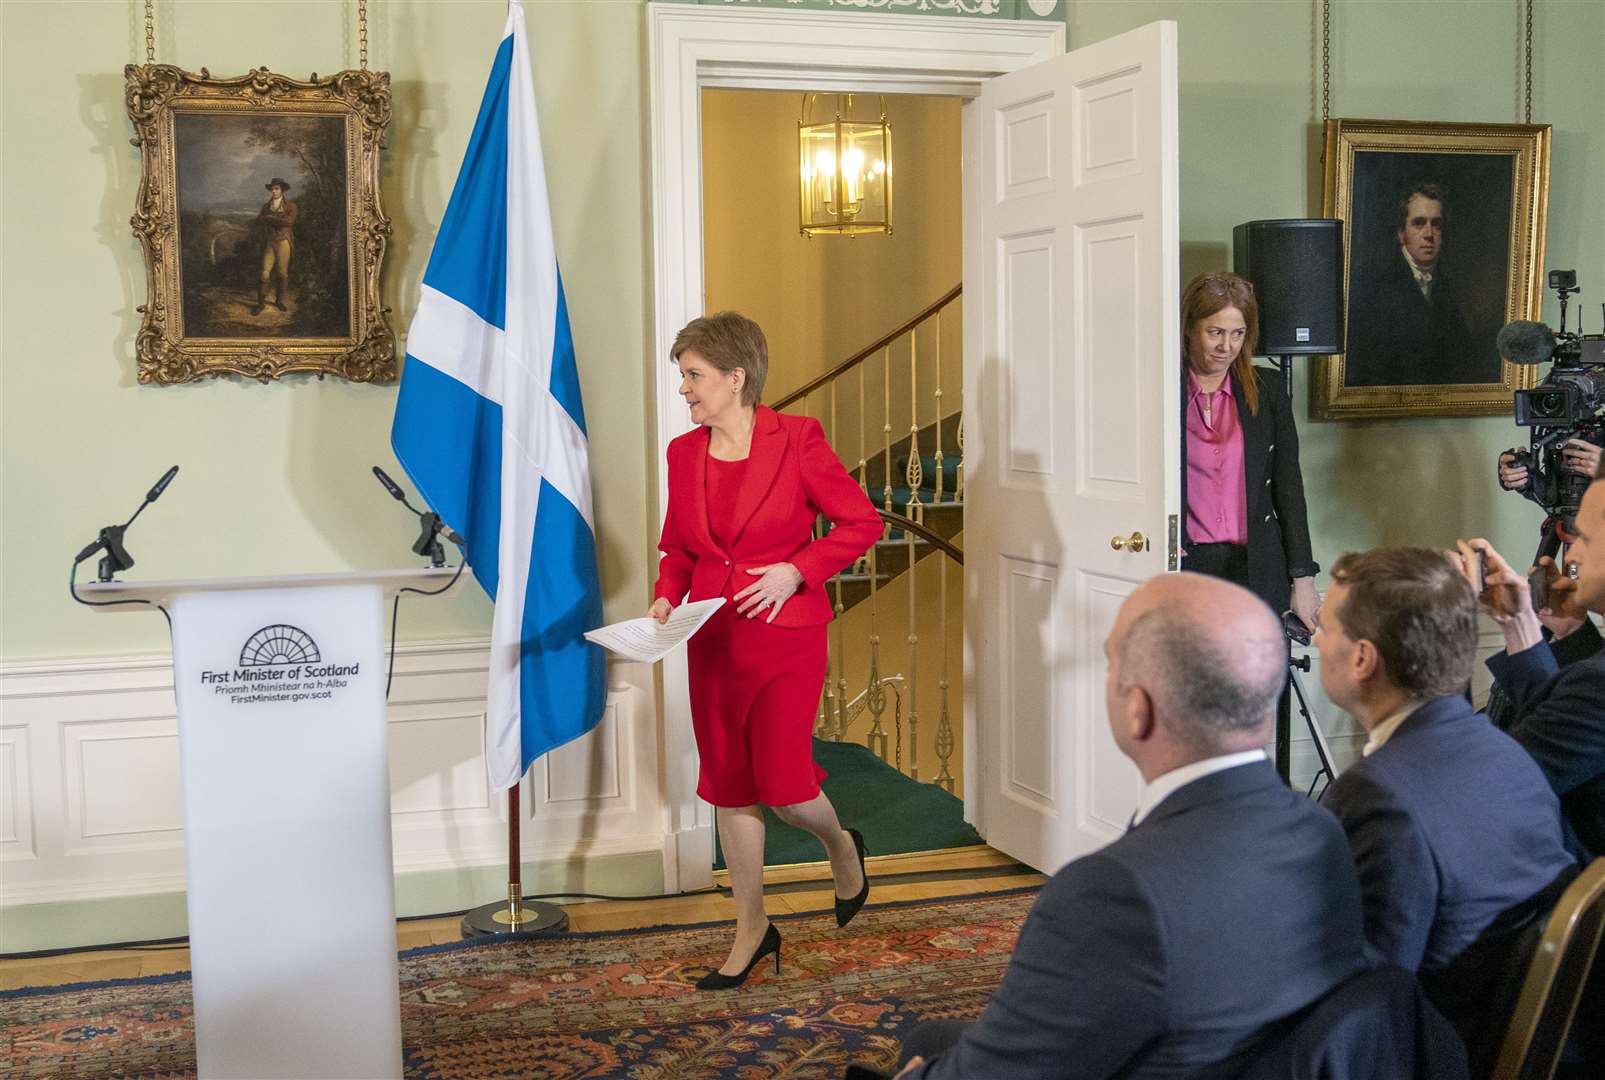 Nicola Sturgeon arrives for the surprise press conference at Bute House (Jane Barlow/PA)